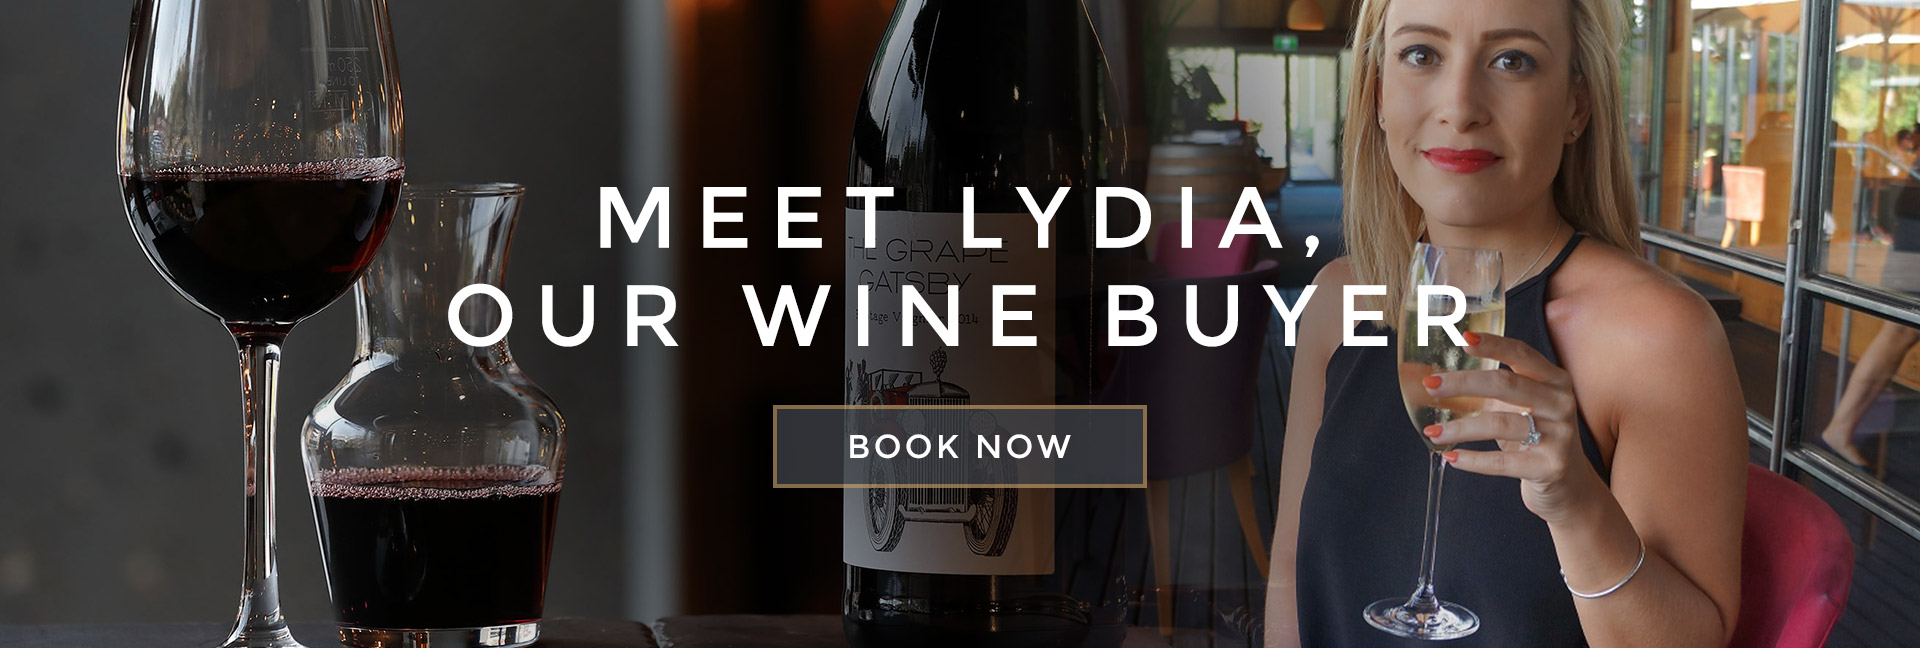 Meet Lydia, our wine buyer at All Bar One Harrogate